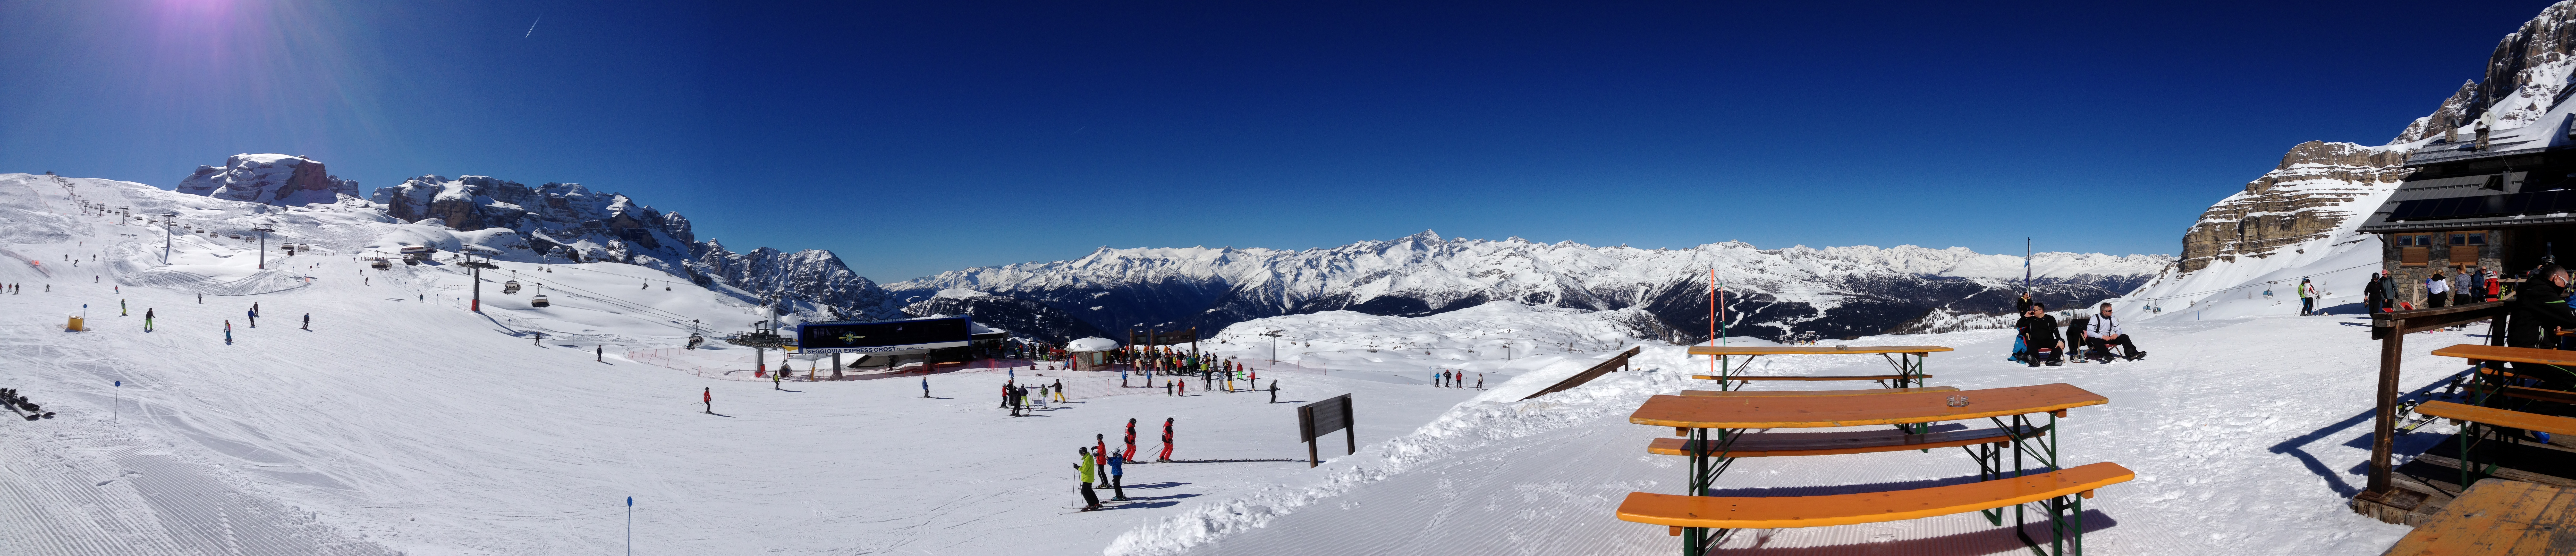 Yet another beautiful day, Madonna di Campiglio